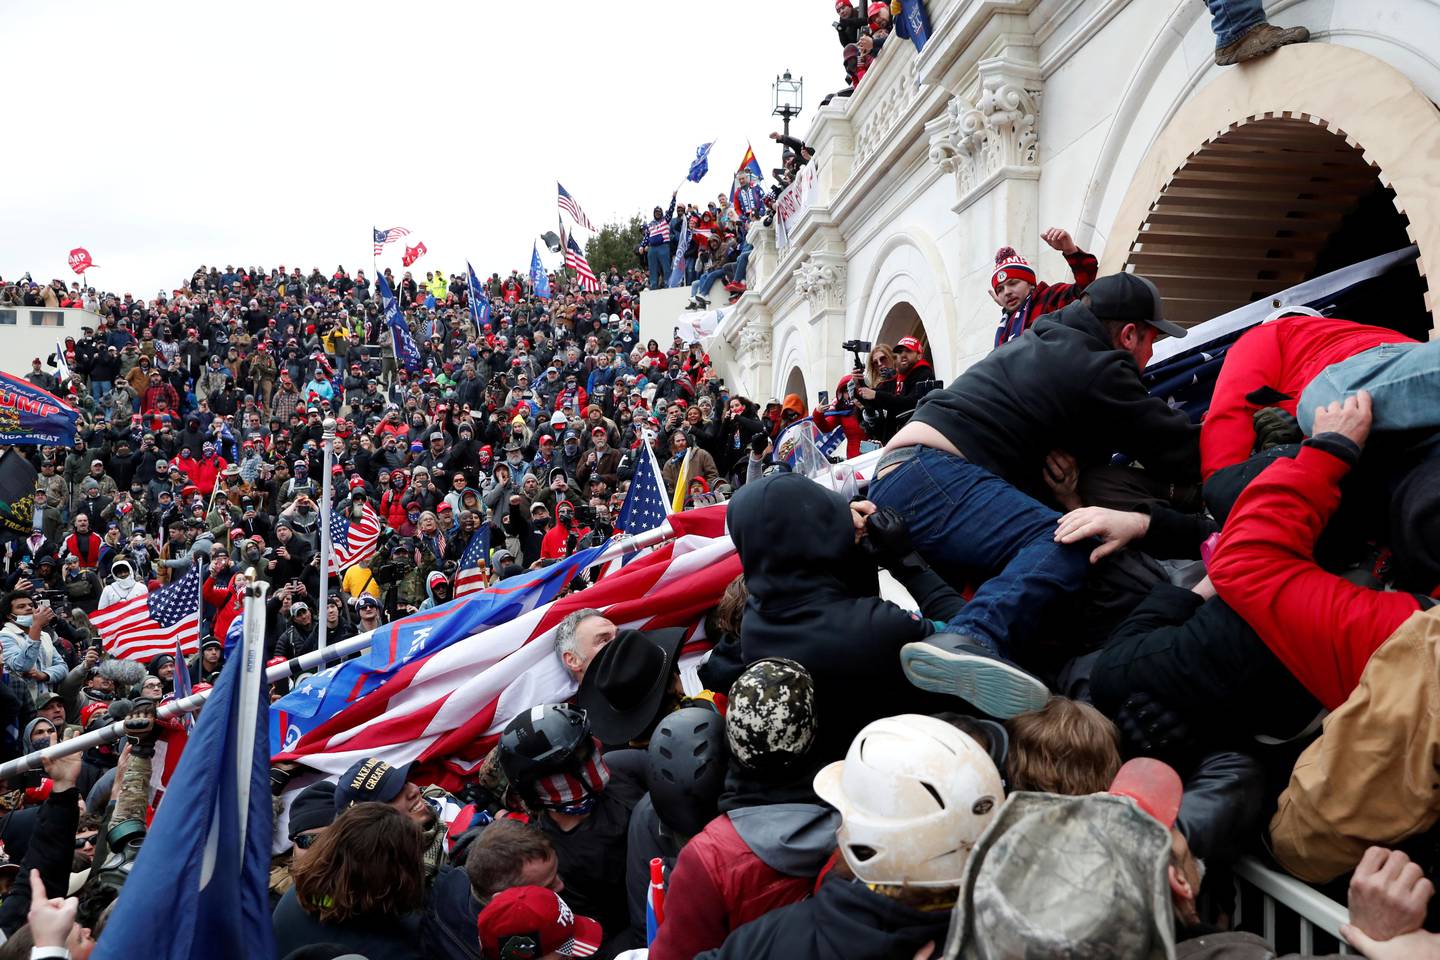 FILE PHOTO: Pro-Trump protesters storm into the U.S. Capitol during clashes with police, during a rally to contest the certification of the 2020 U.S. presidential election results by the U.S. Congress, in Washington, U.S, January 6, 2021. REUTERS/Shannon Stapleton - RC2P2L93TPZS/File Photo